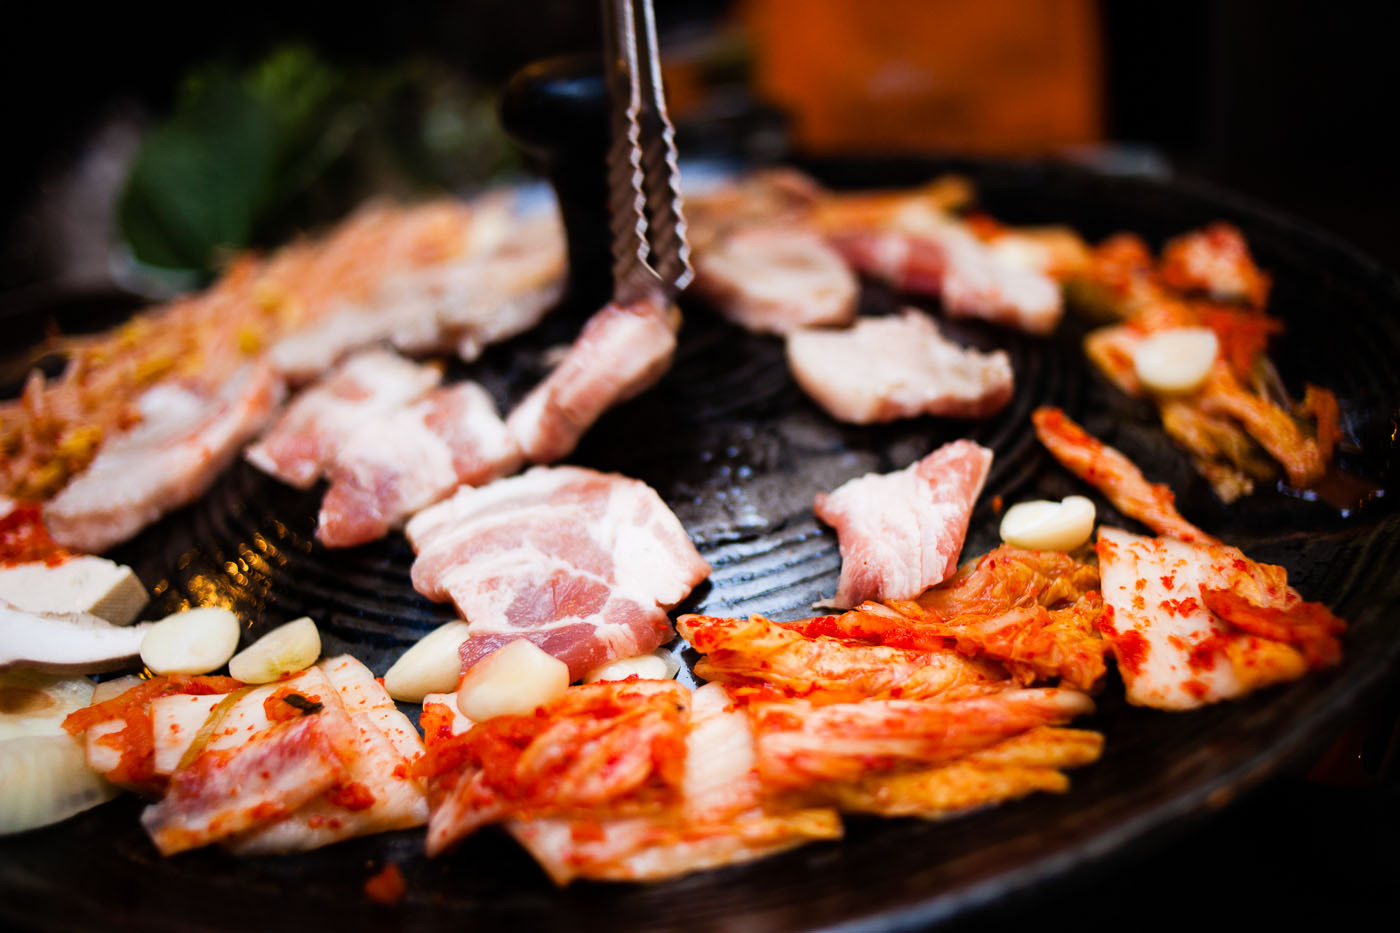 Cooking samgyeopsal at a restaurant in Seoul, South Korea